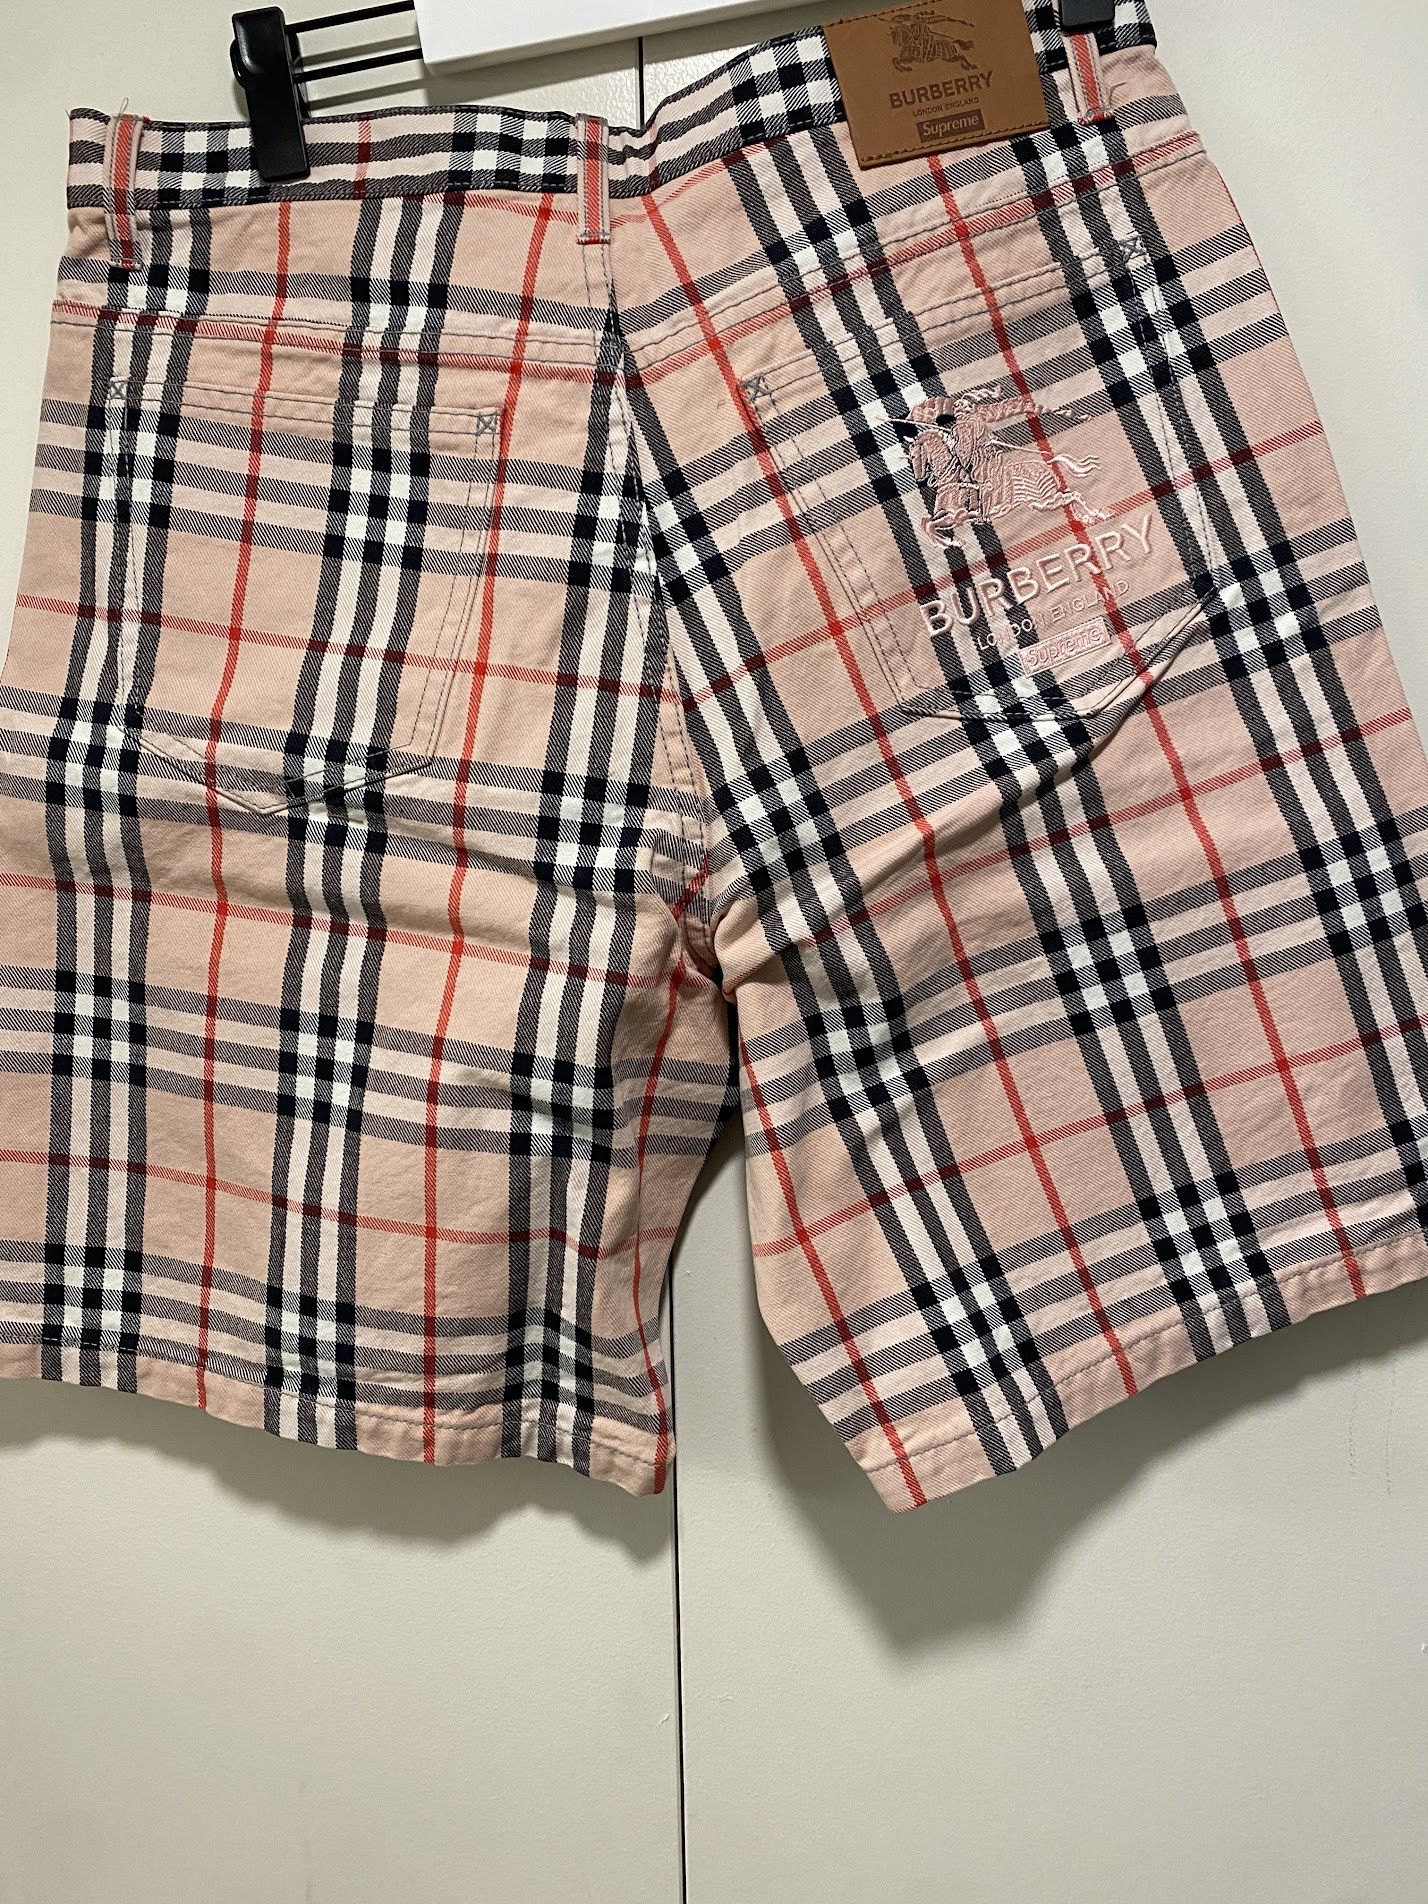 Supreme Burberry x Supreme S/S 22 Shorts Jeans - Pink Size 32 